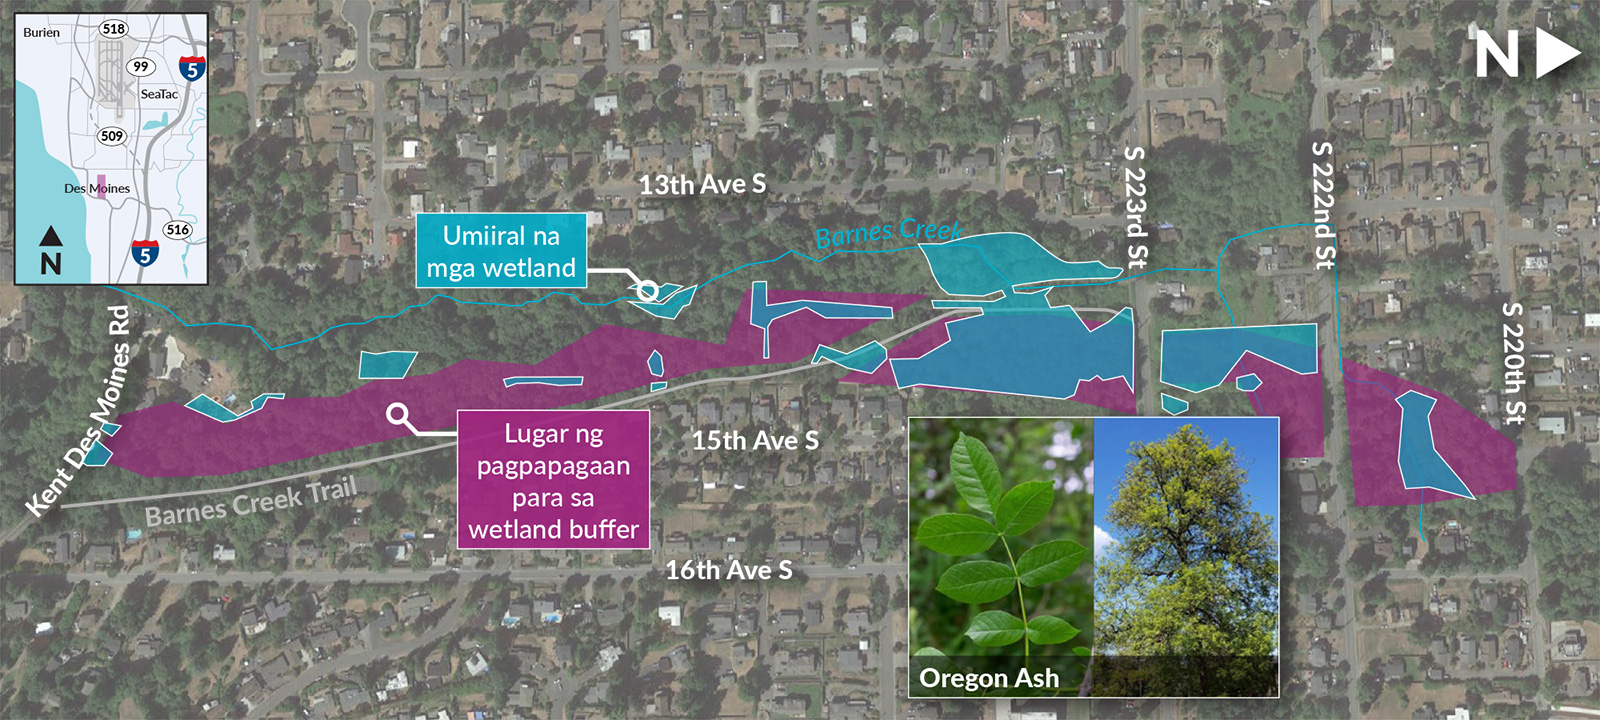 A map of the Barnes Creek Wetland Mitigation Site showing existing wetland areas and wetland buffer mitigation areas, all labels in Tagalog.
